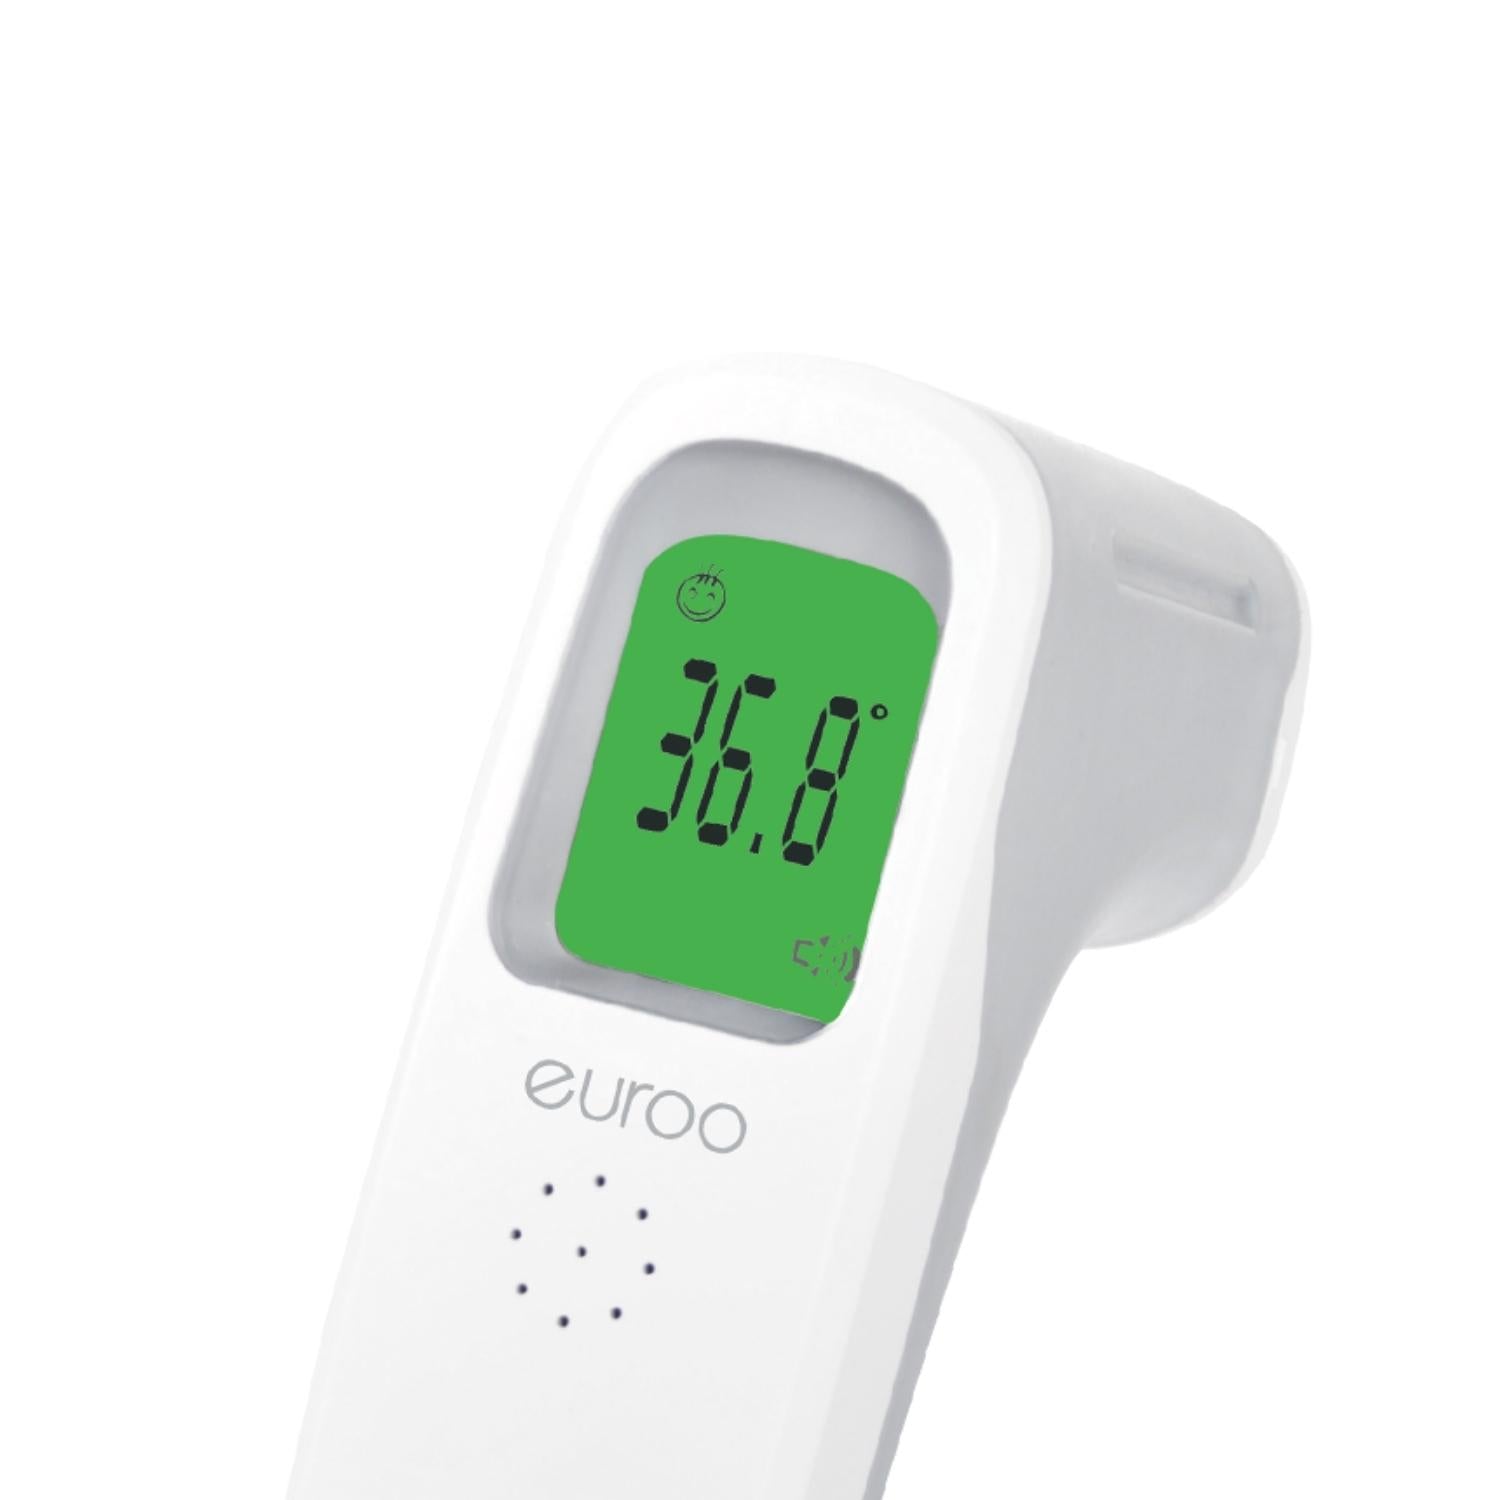 EUROO EPH-2221FT 3-IN-1 Infrared Thermometer